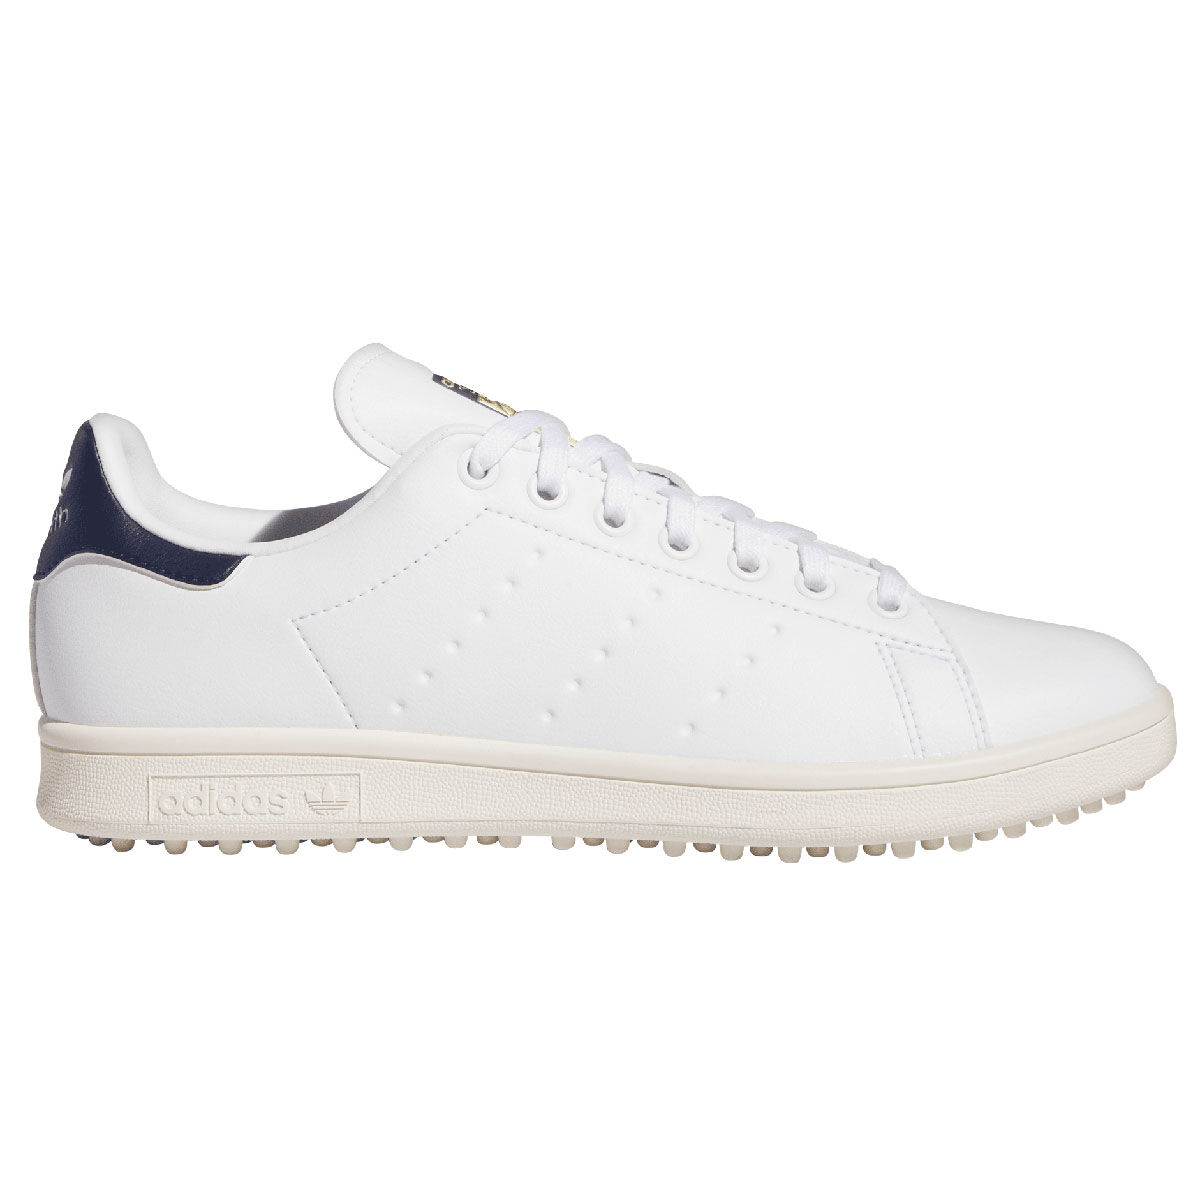 adidas Men’s Stan Smith Waterproof Spikeless Golf Shoes, Mens, White/wonder blue/off white, 10 | American Golf